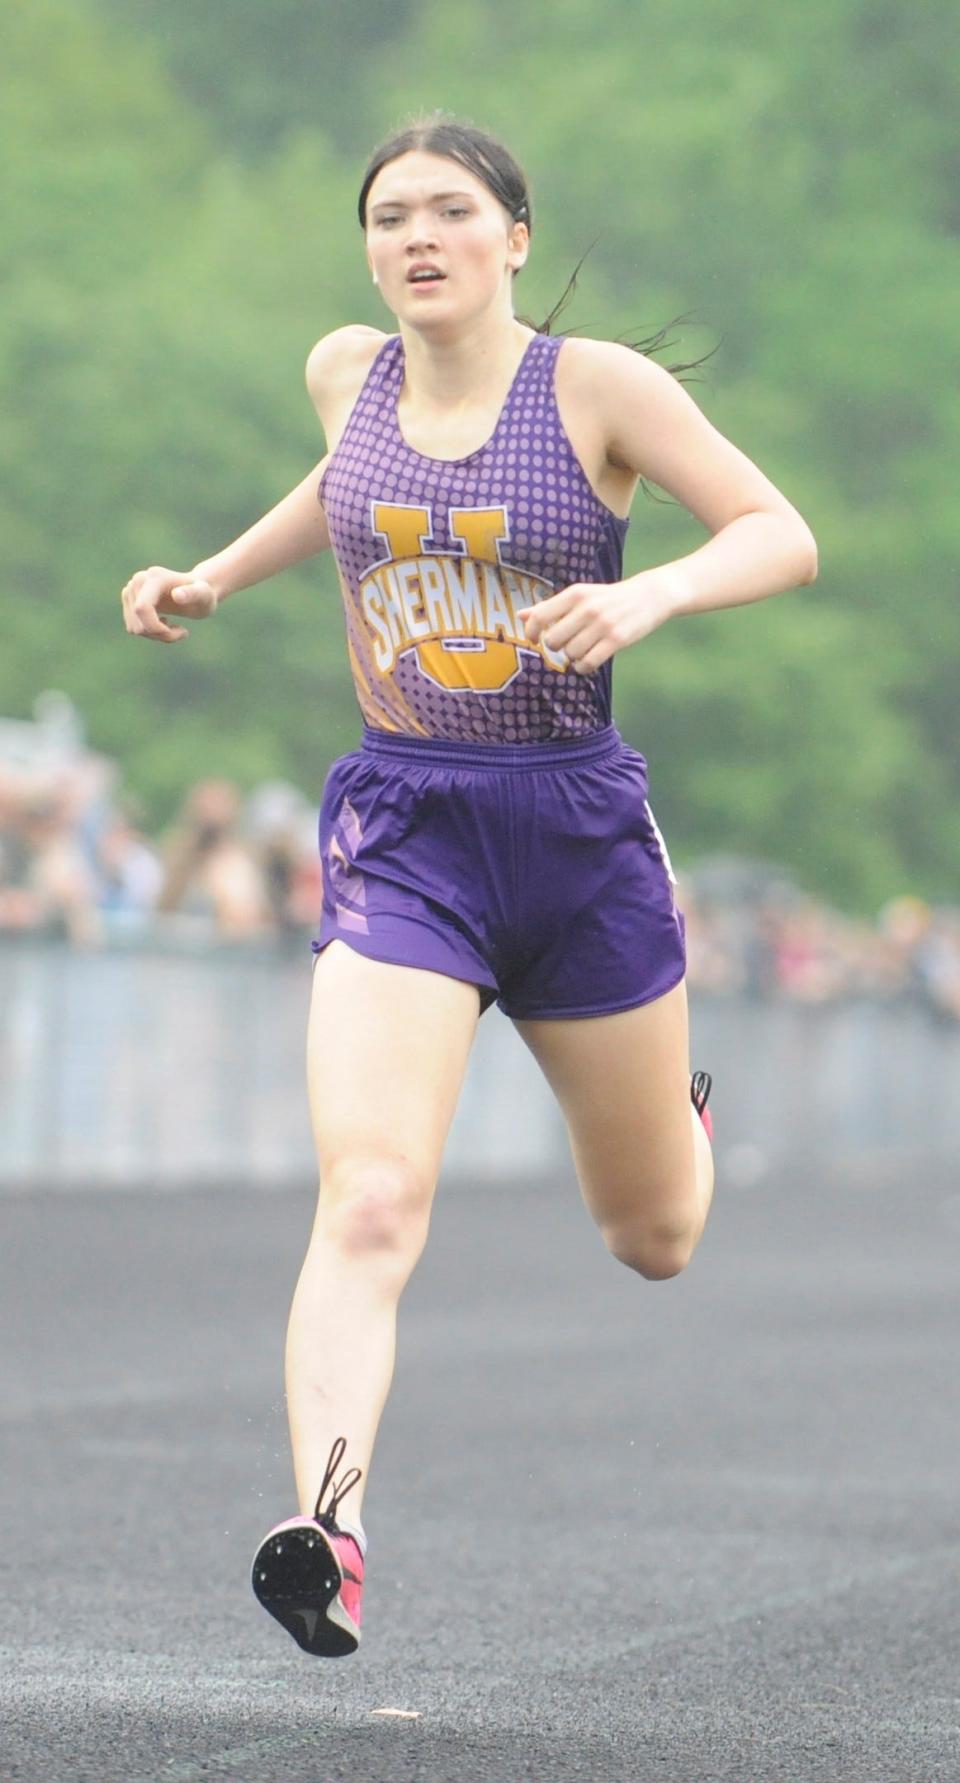 Unioto's Cameron Walker finishes the final lap of the girls 800m run during the Scioto Valley Conference track and field championships at Huntington High School on May 12, 2023.